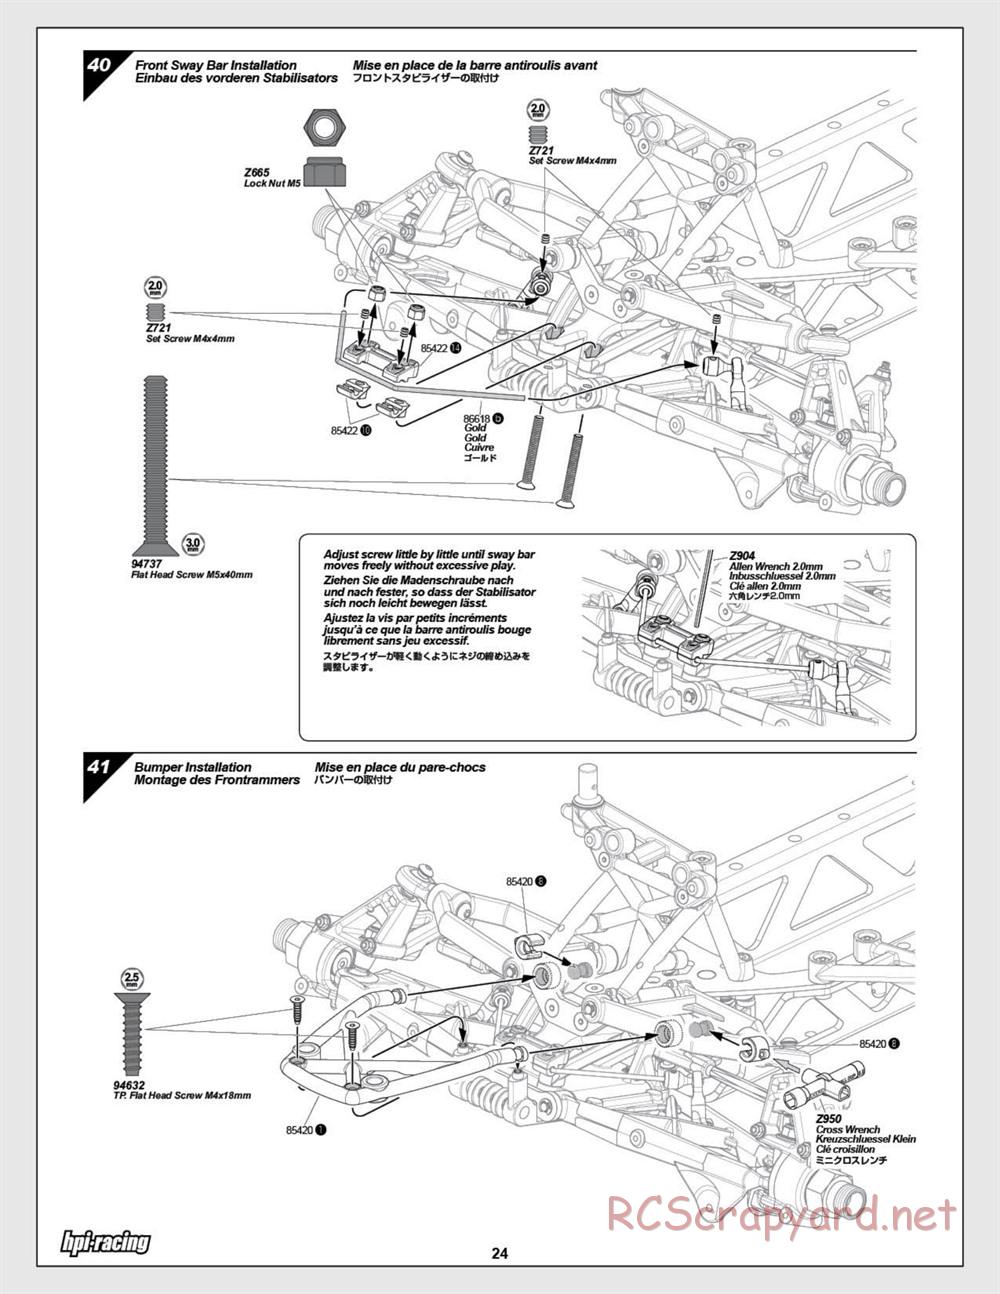 HPI - Baja 5SC SS - Exploded View - Page 24